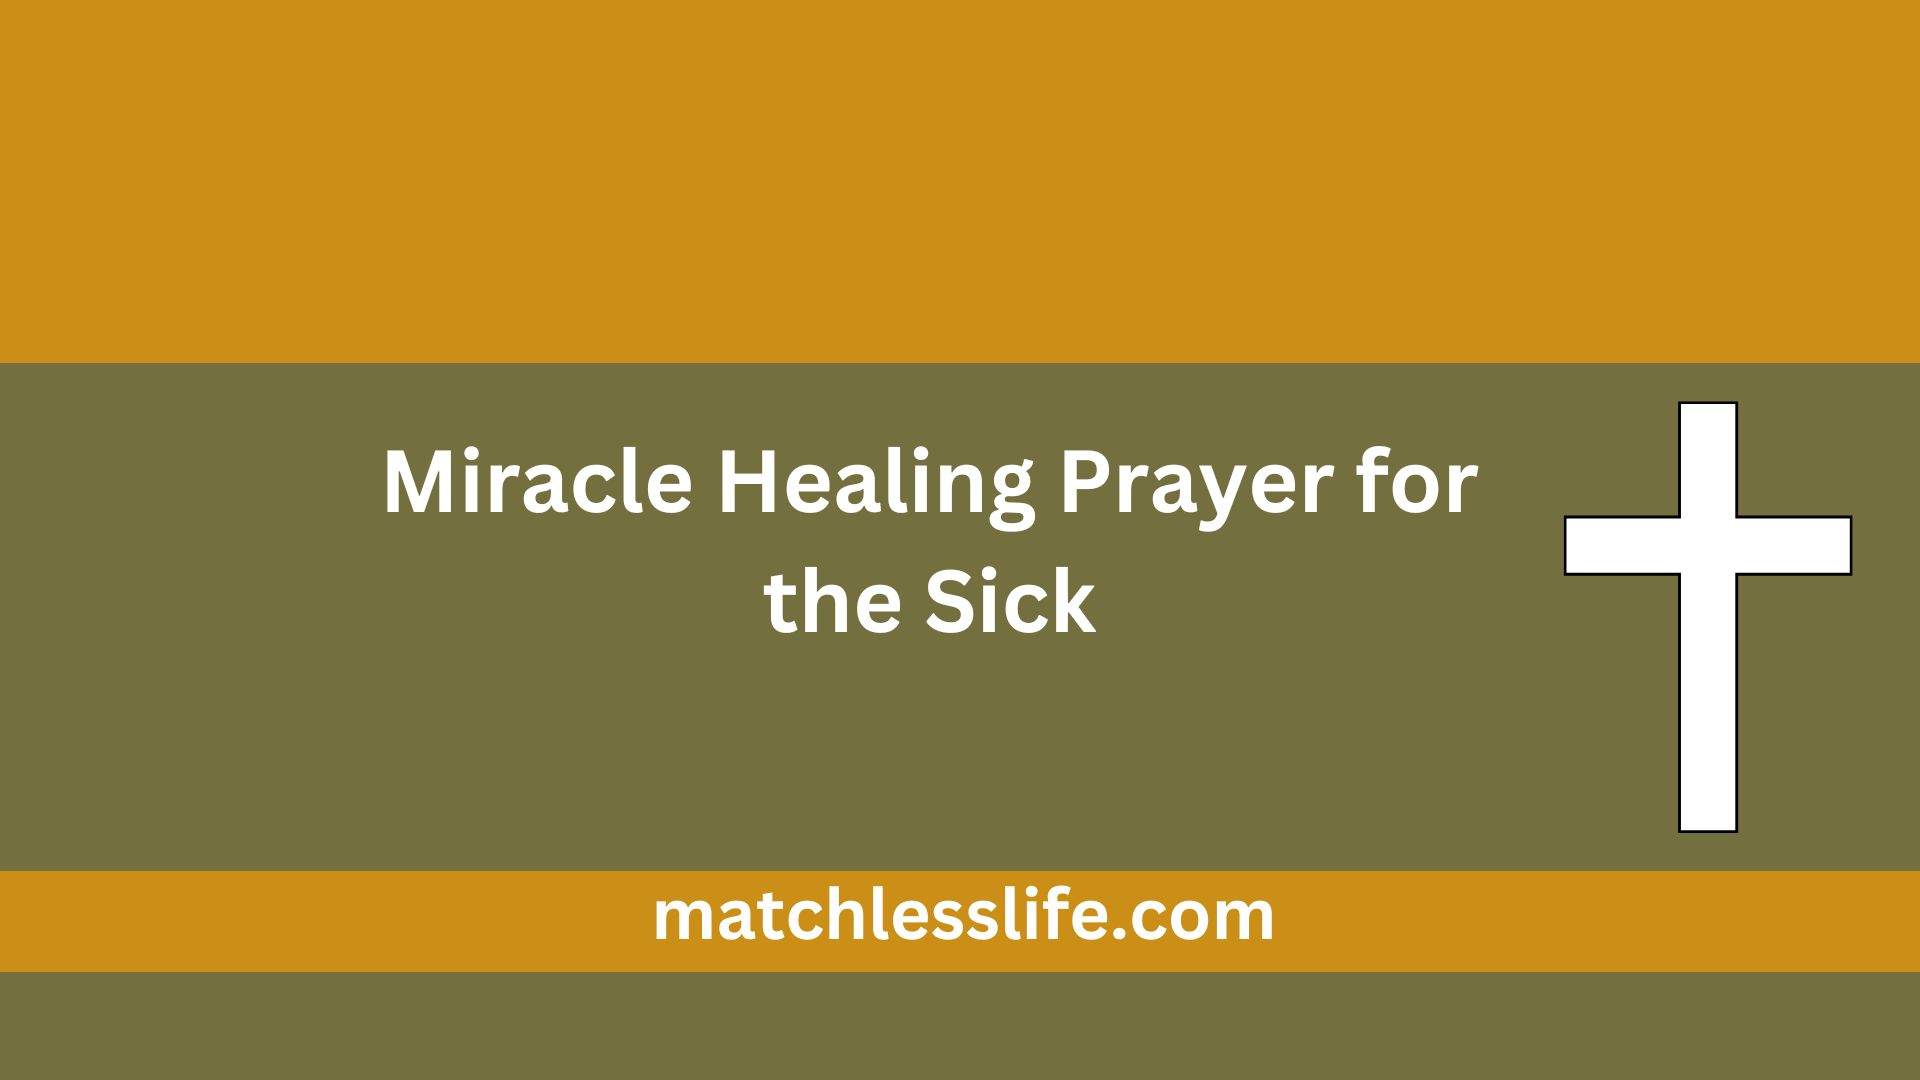 Miracle Healing Prayer for the Sick